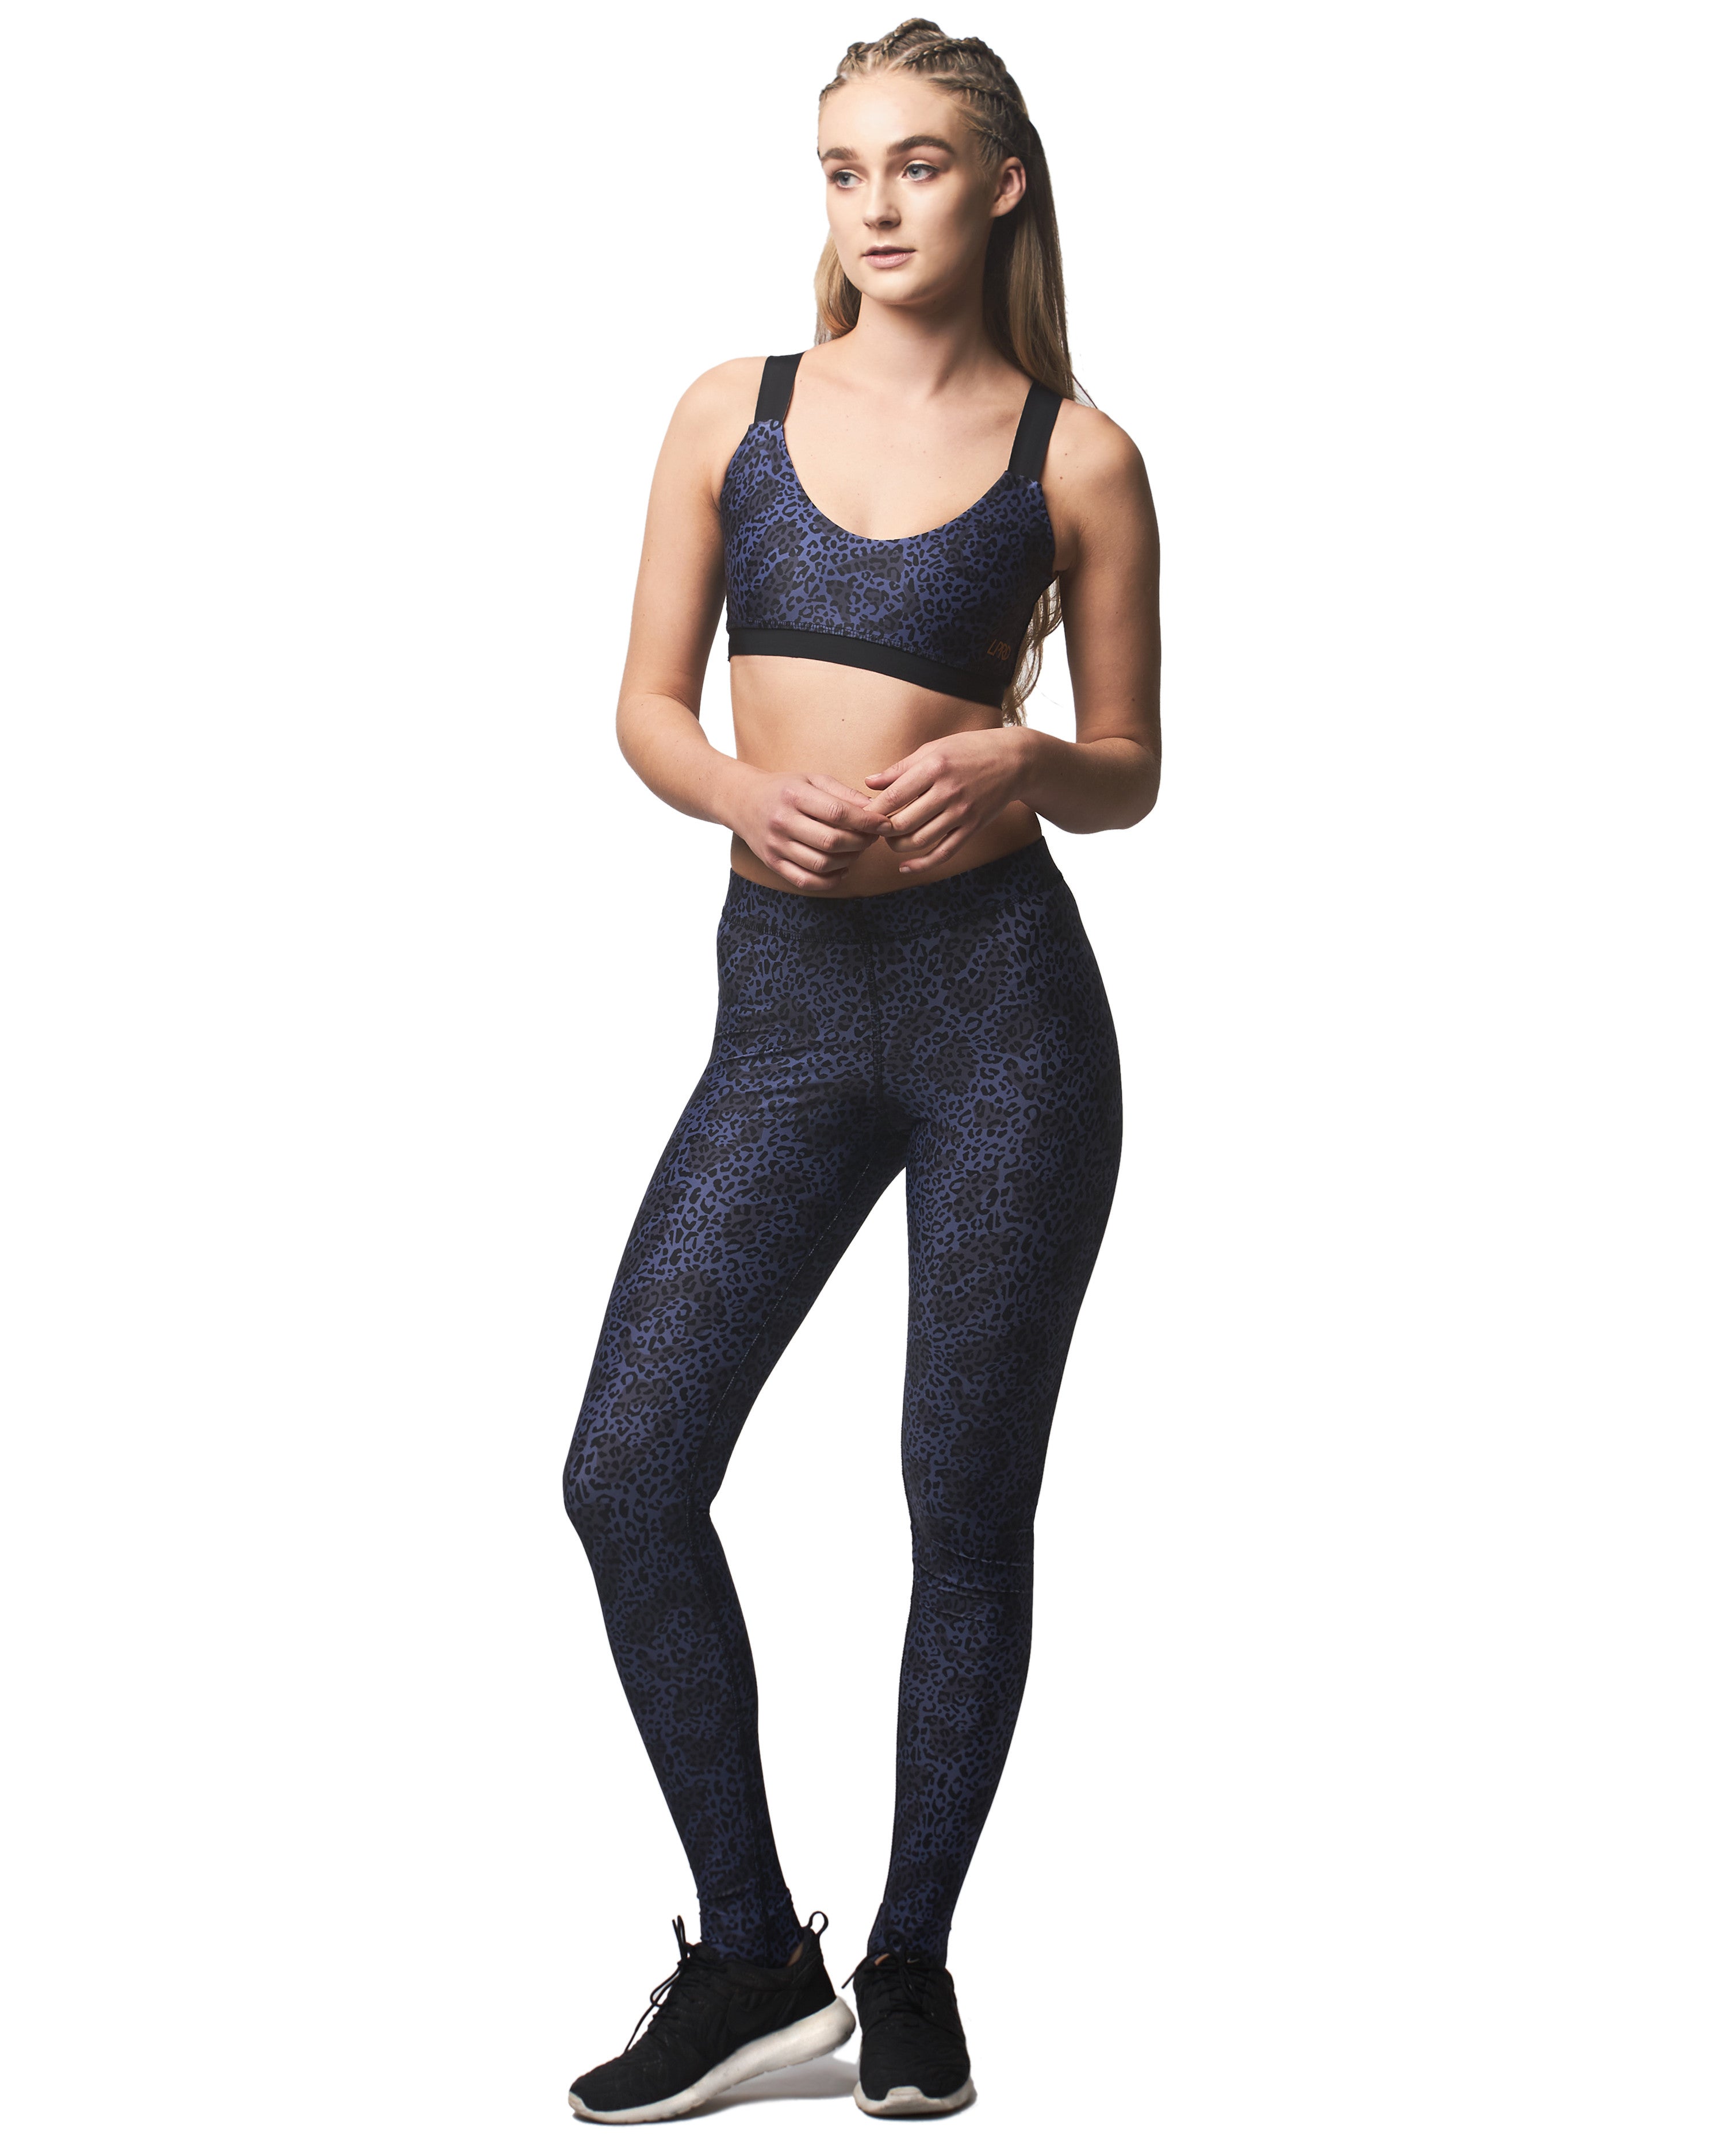 Activewear leggings - Form fitting tights for running, cycling